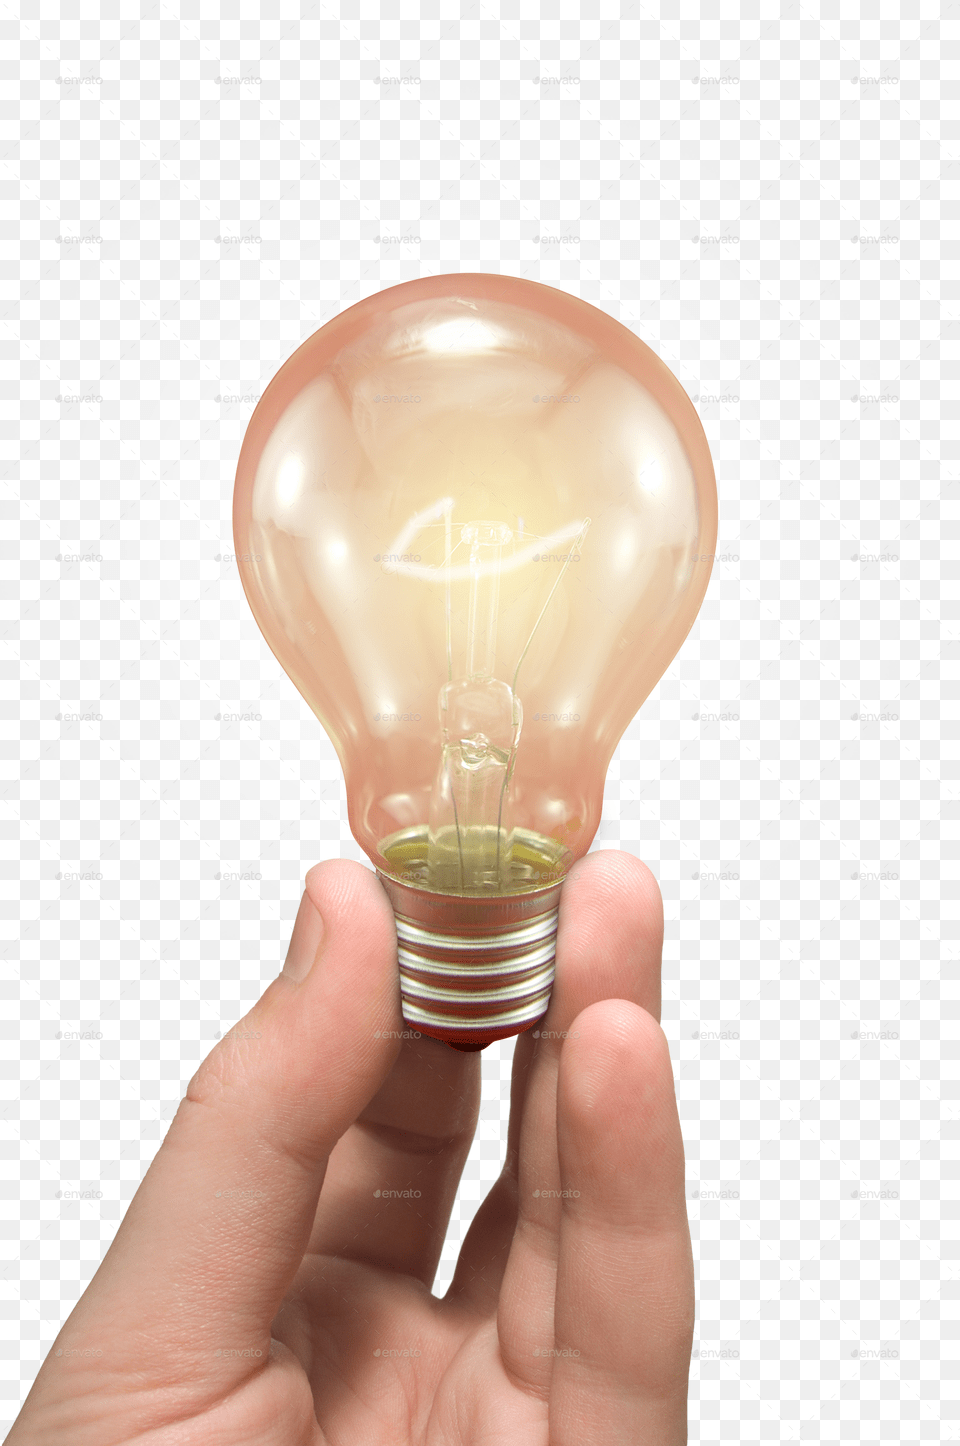 Download Image Preview Setbulb 1 Hand Light Bulb Hand With Light Bulb, Lightbulb Png